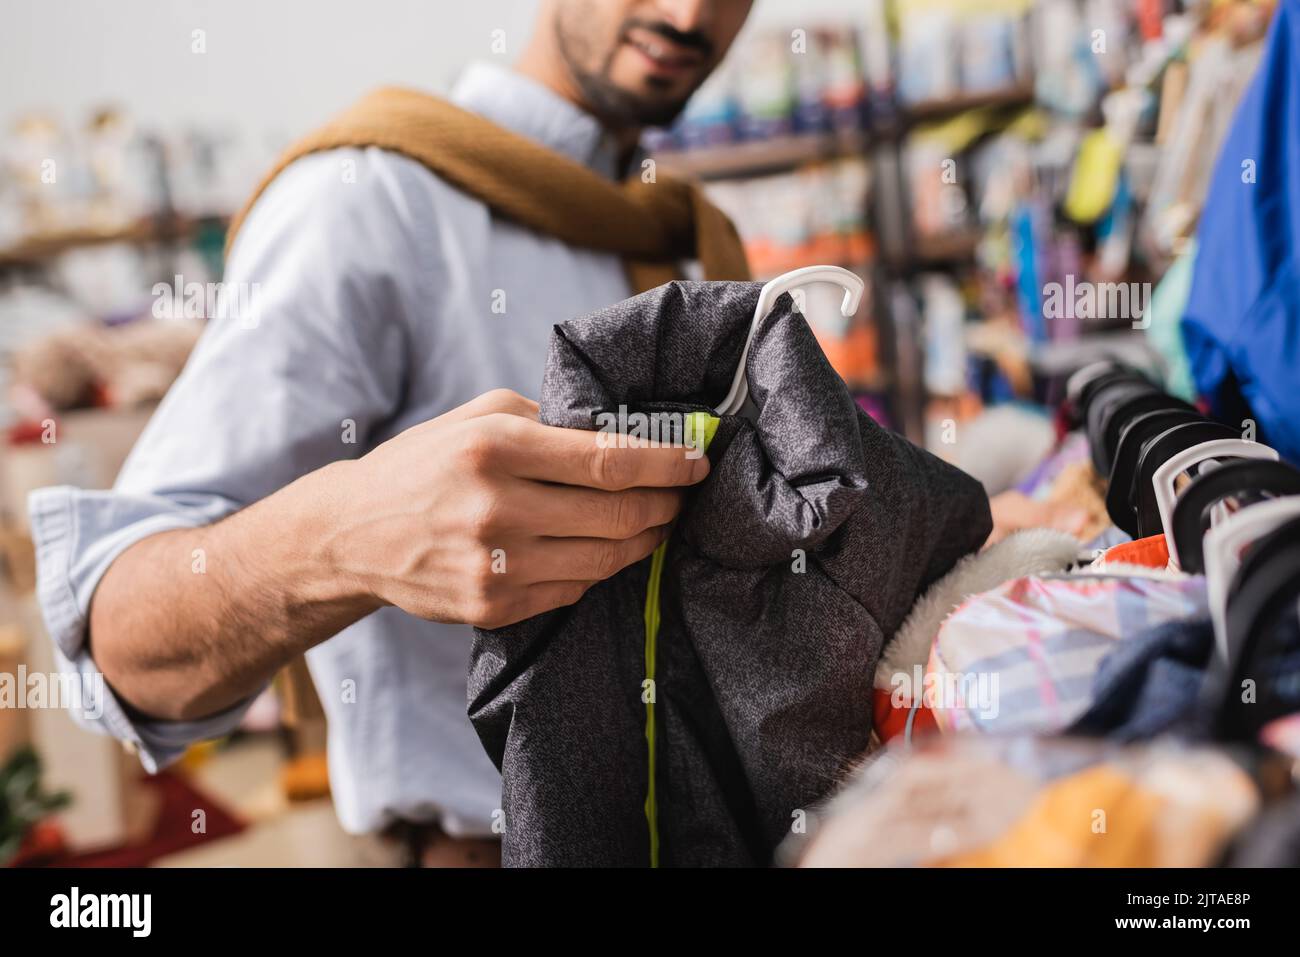 Cropped view of man holding animal jacket in pet shop Stock Photo